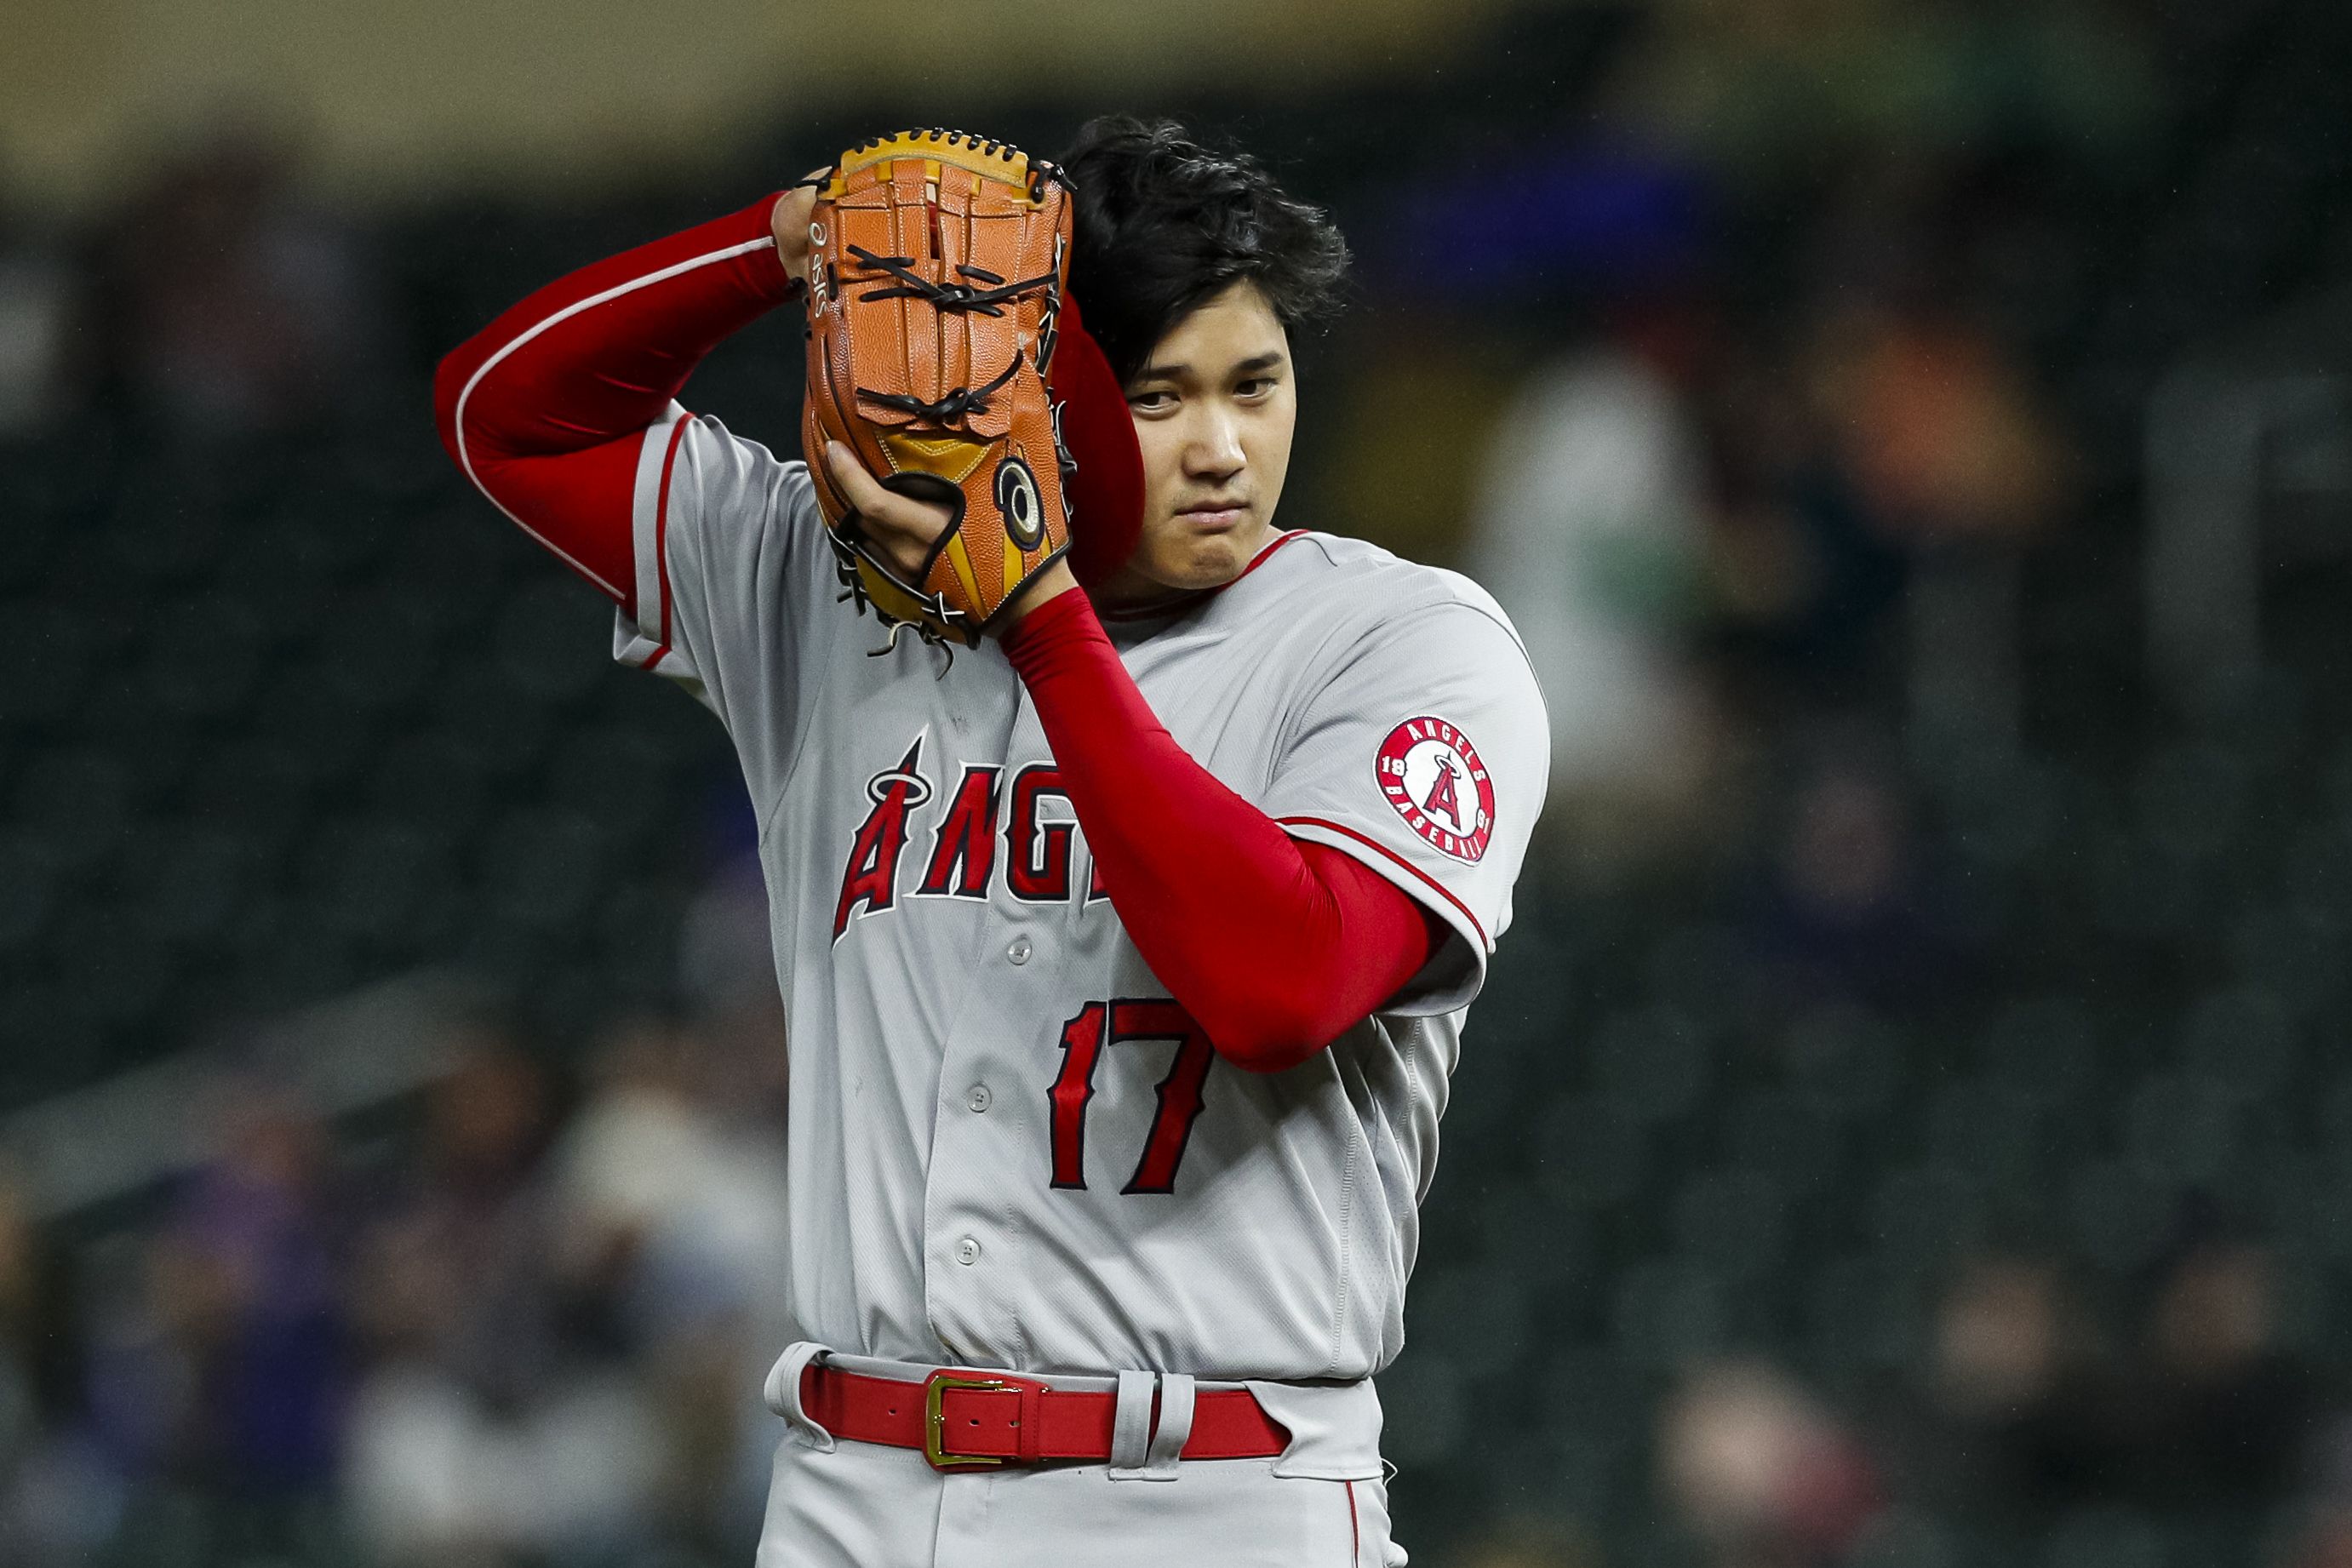 Los Angeles Angels: We shouldn't fully trust in pitcher Shohei Ohtani